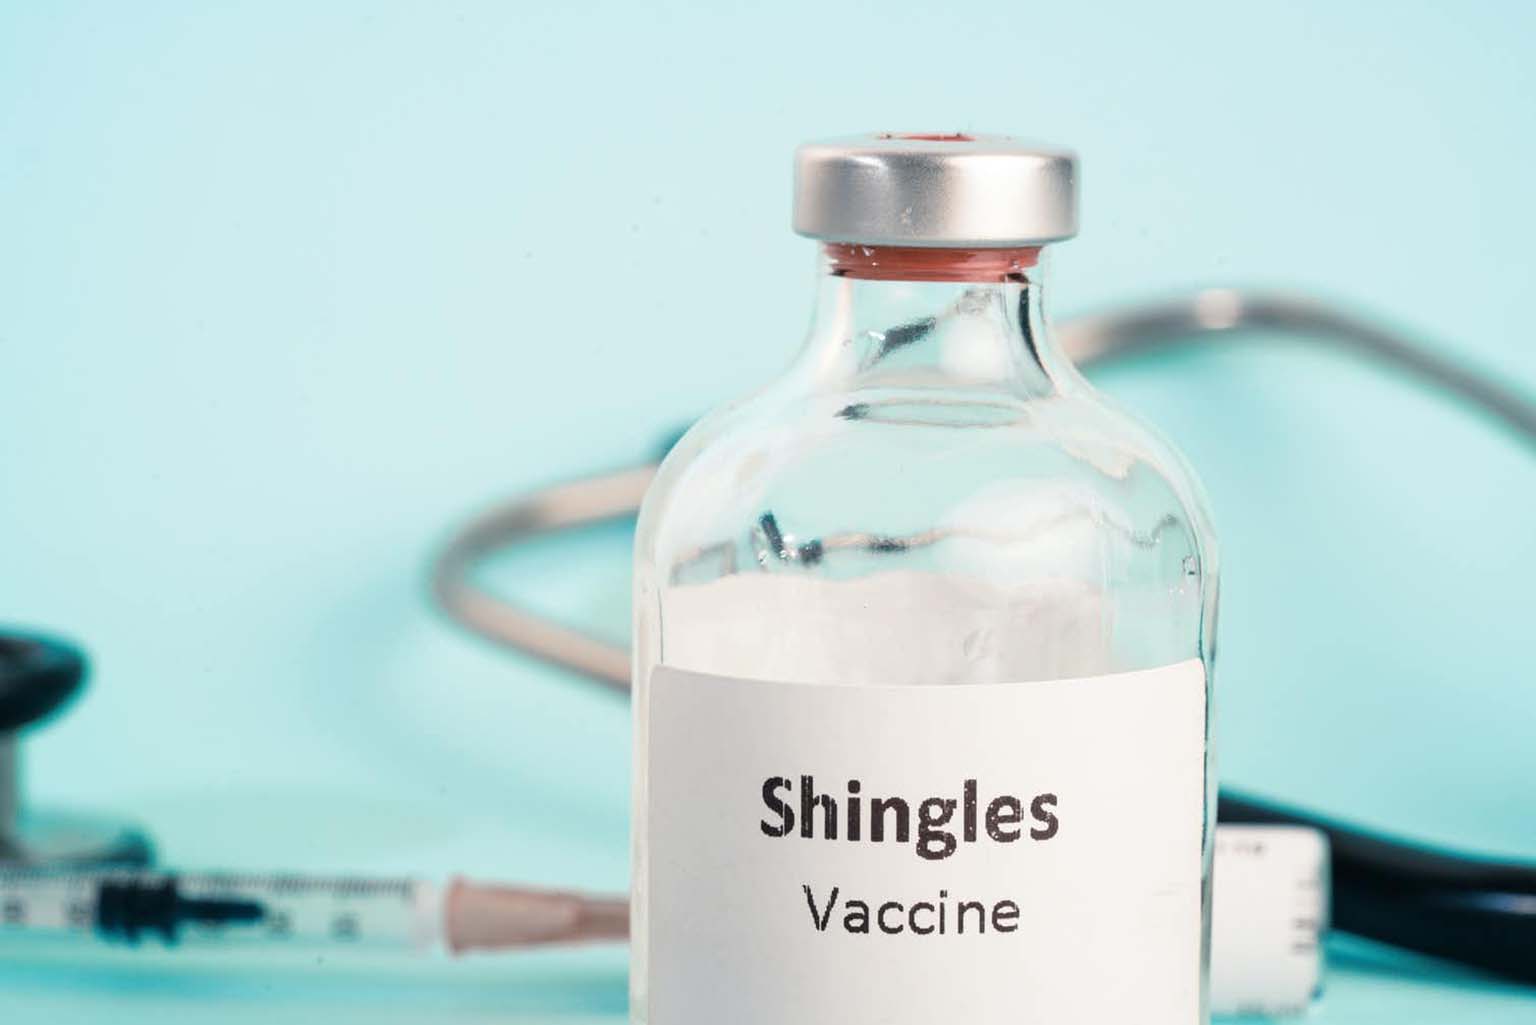 A bottle of shingles vaccine and a syringe.